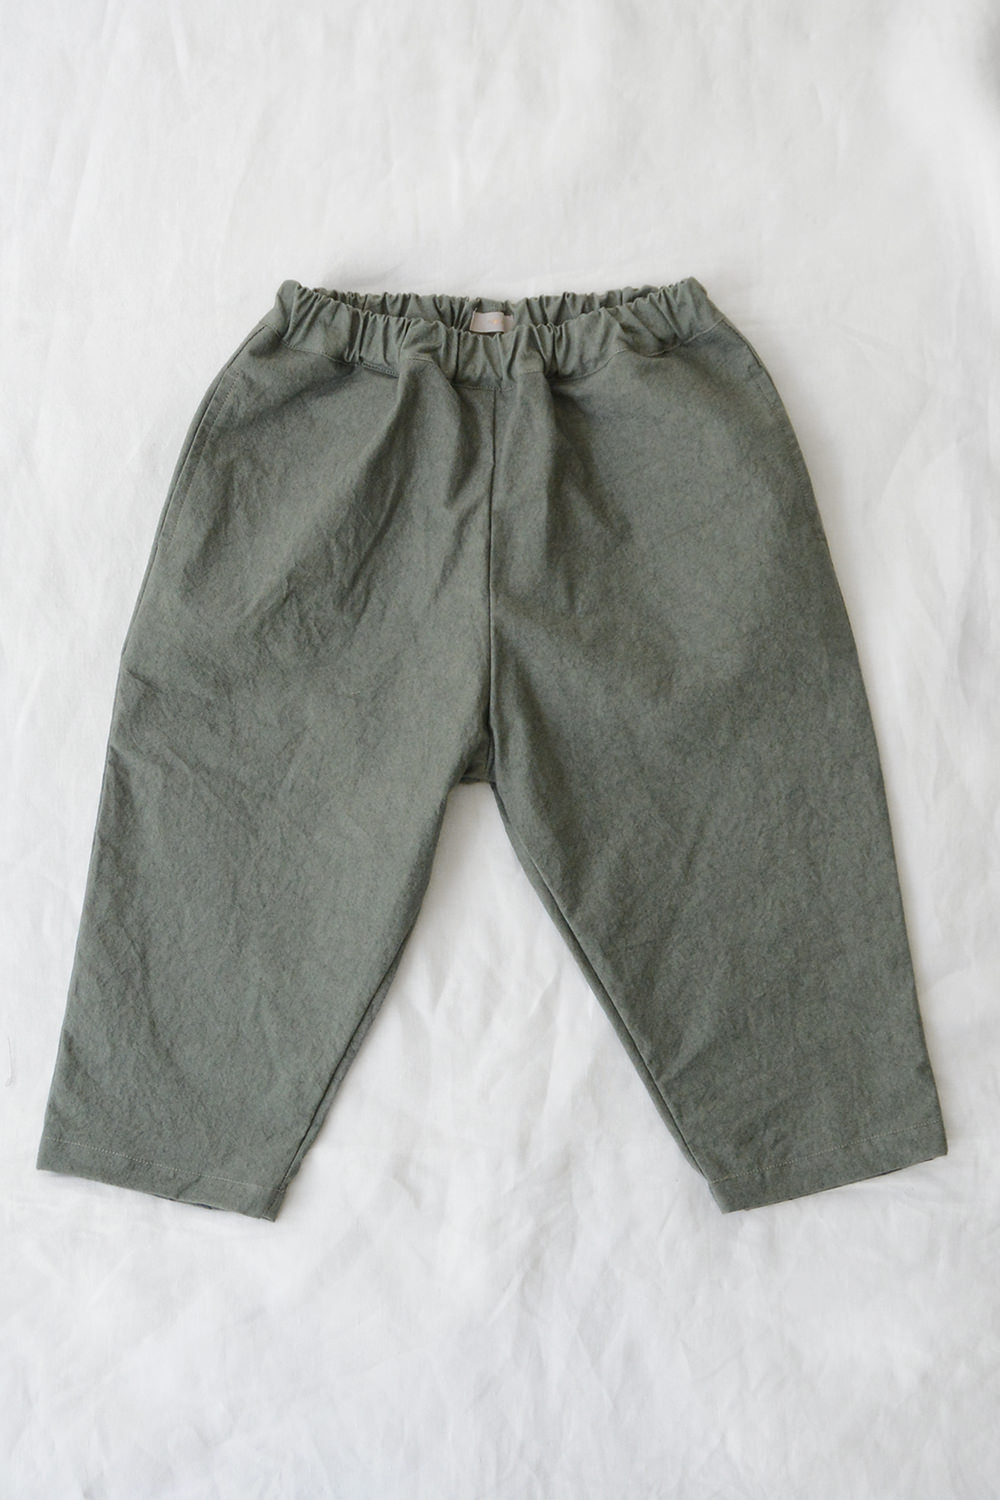 MAKIE Cotton Pants in army green Top Picture.